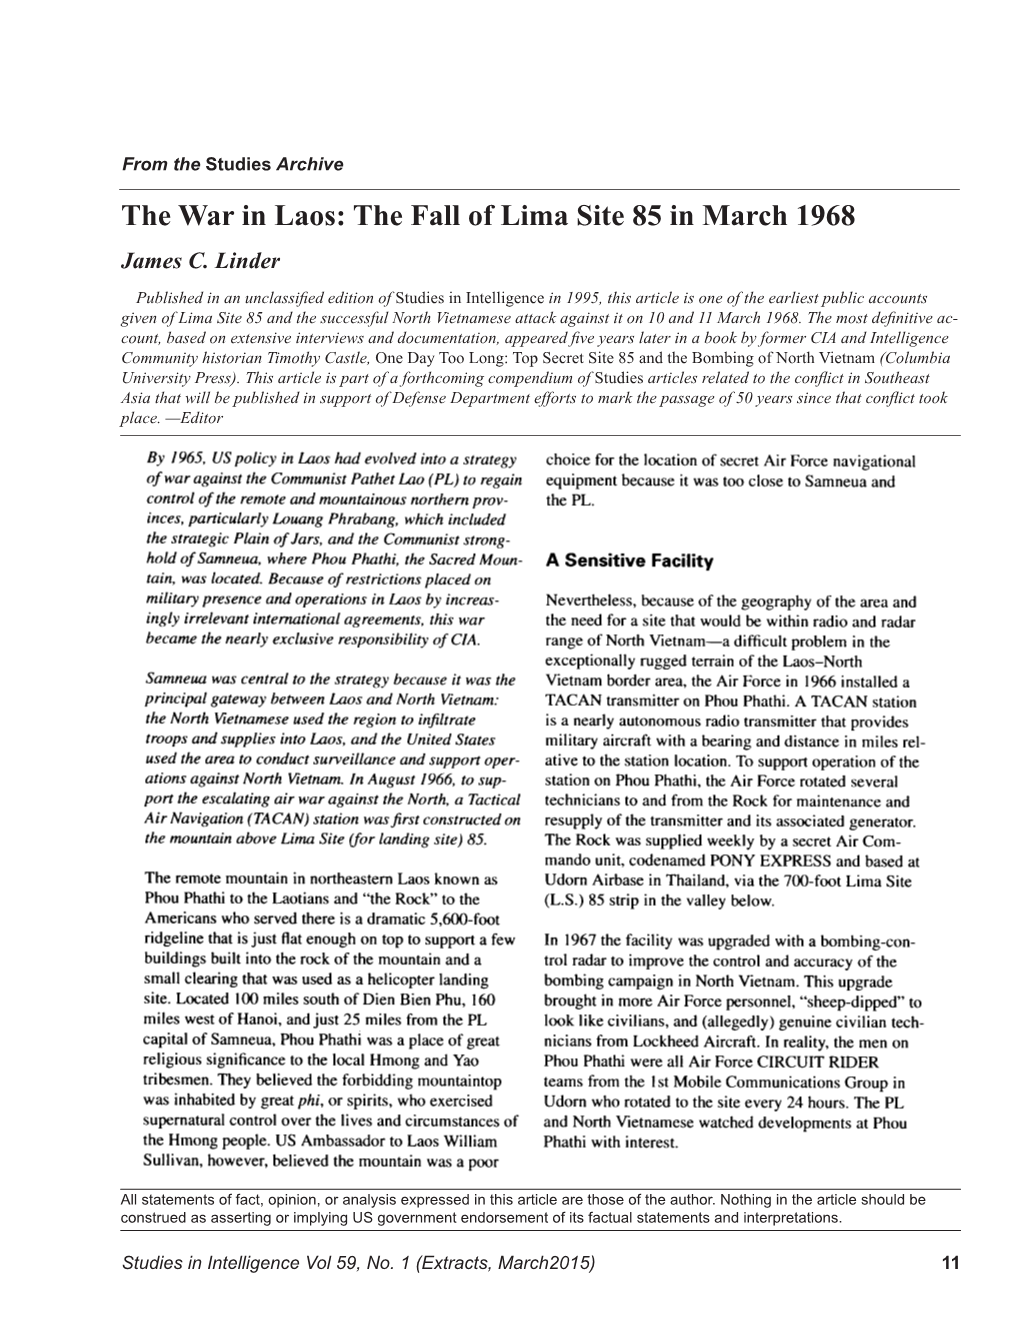 The War in Laos: the Fall of Lima Site 85 in March 1968 James C